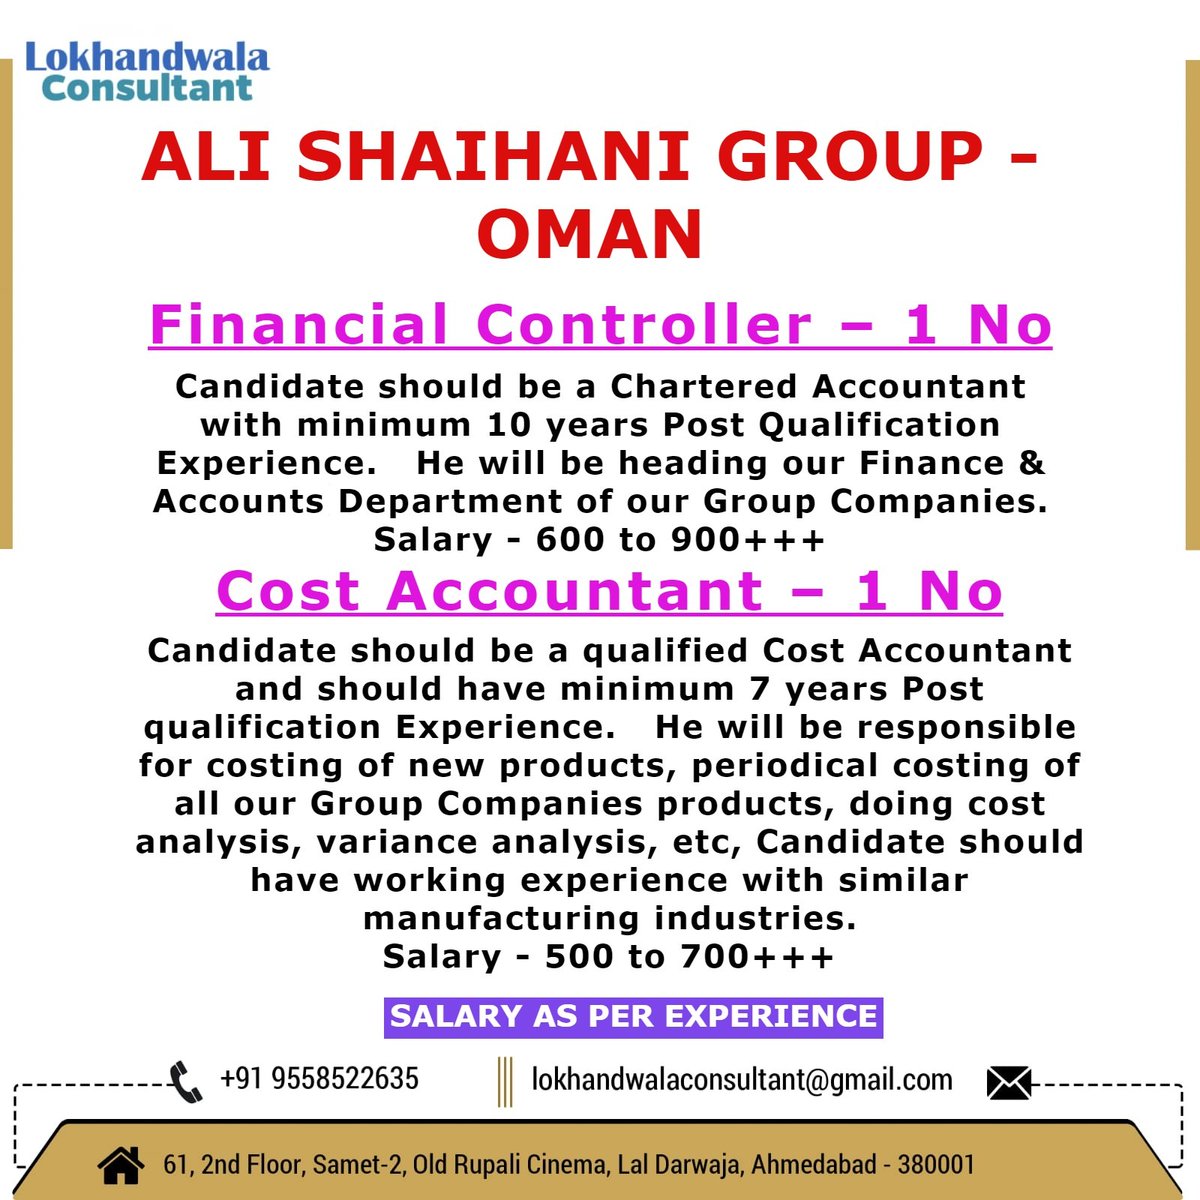 Urgent Requirement for OMAN
1) Financial Controller
2) Cost Accountant

#lokhandwalaconsultant #gulfjobs #omanjobs #oman #recruitment #vacancy #jobseekers #financialcontroller #costaccountant